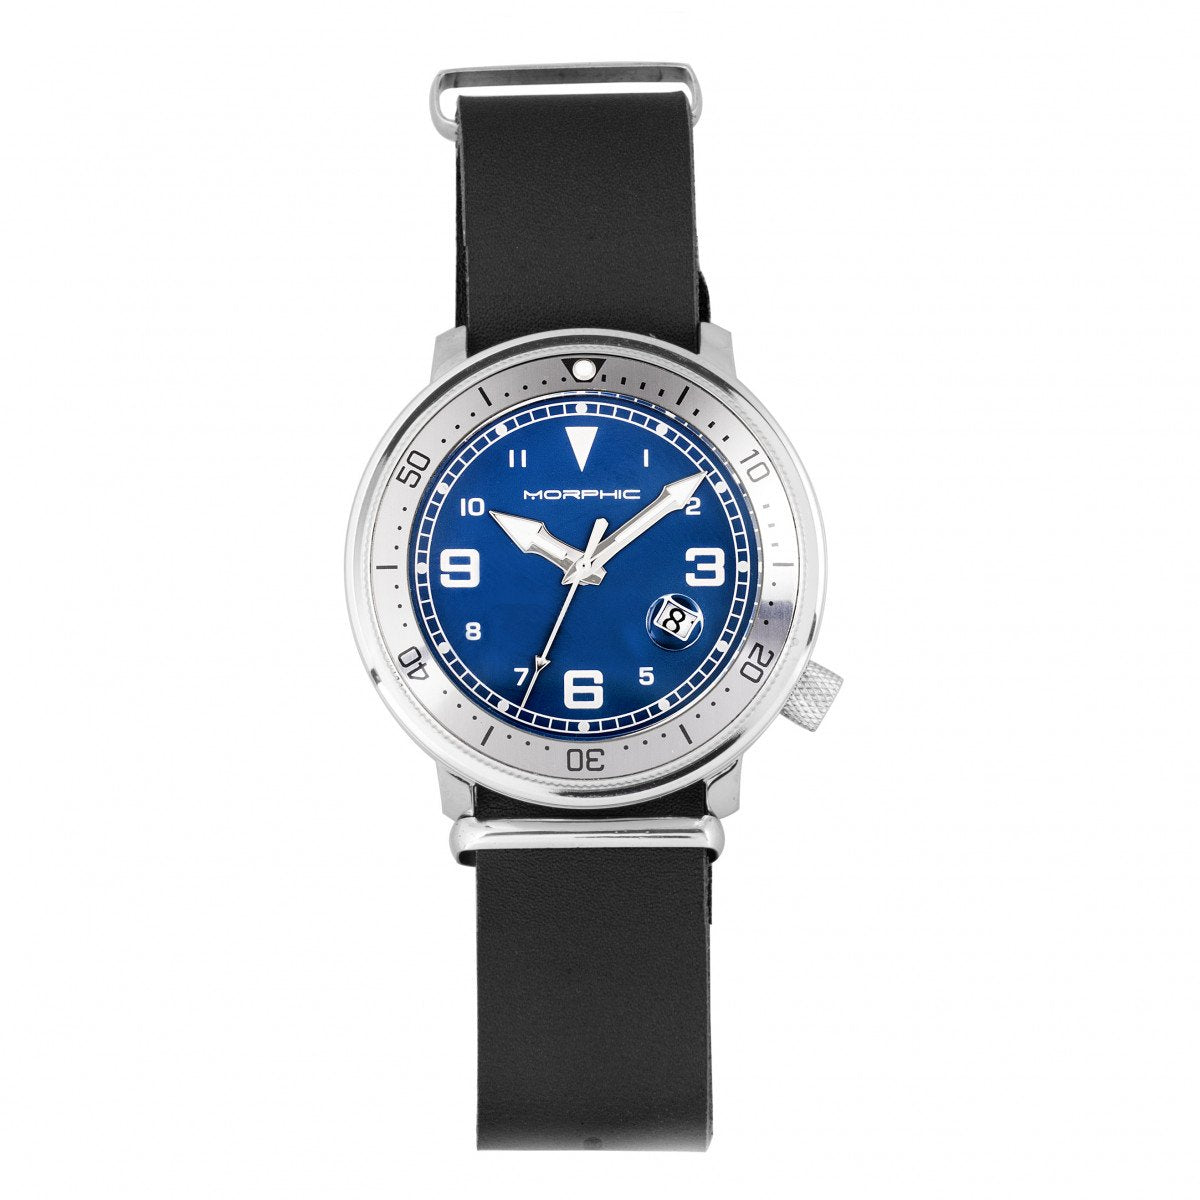 Morphic M74 Series Leather-Band Watch w/Magnified Date Display - Black/Grey/Blue - MPH7408